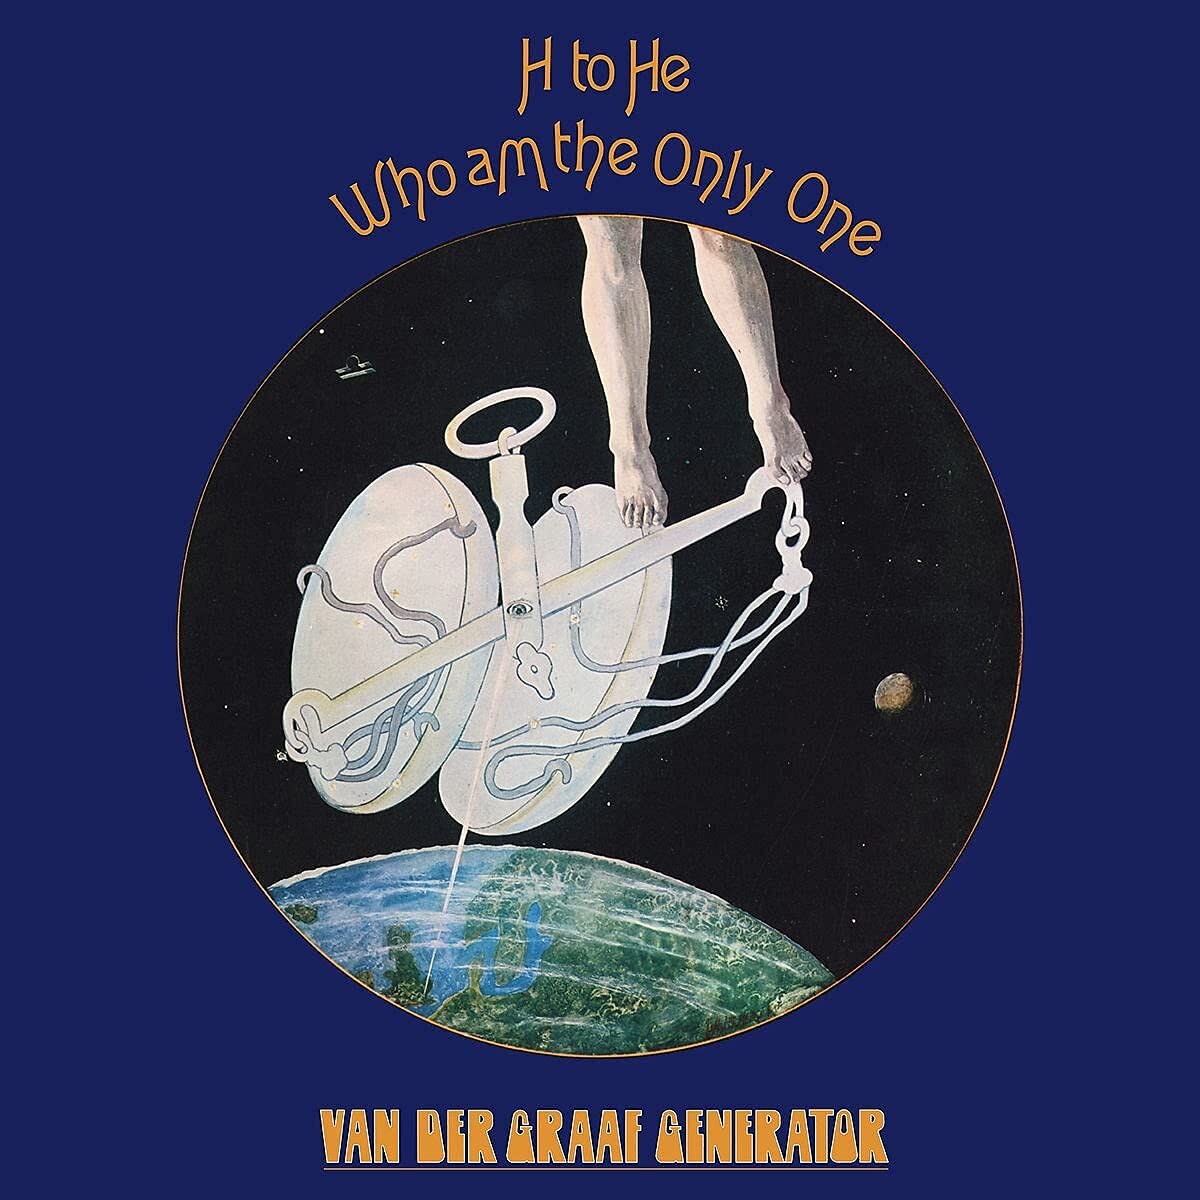 Van Der Graaf Generator - H To He Who Am The Only One (REMASTERED DELUXE EDITION, 2CD) (2021) FLAC Download